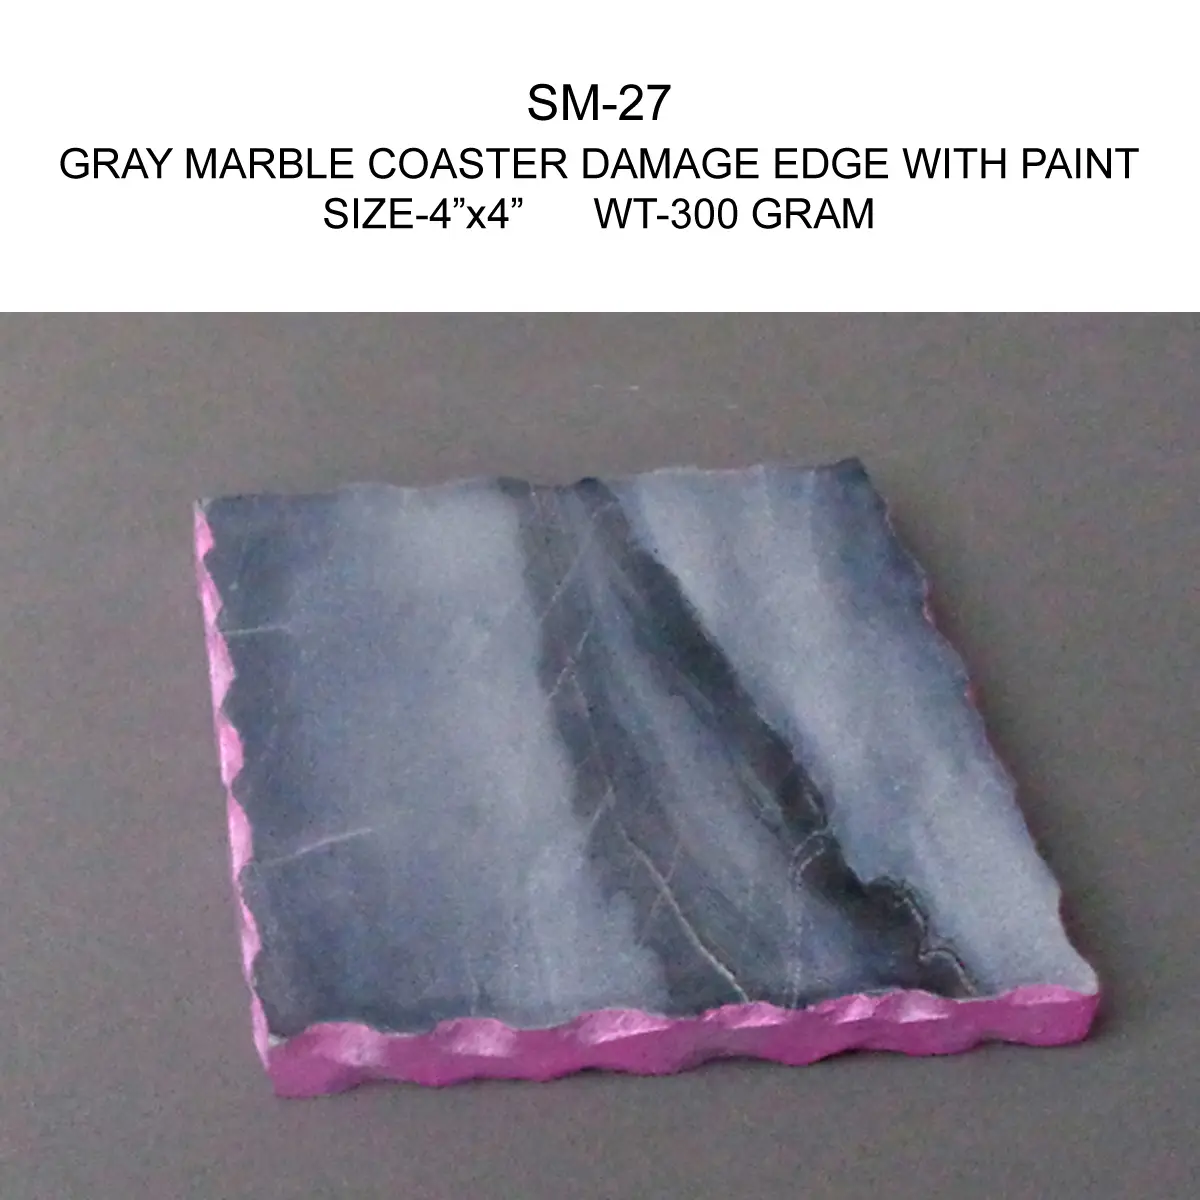 GRAY MARBLE COASTER DAMAGE EDGE WITH PAINT